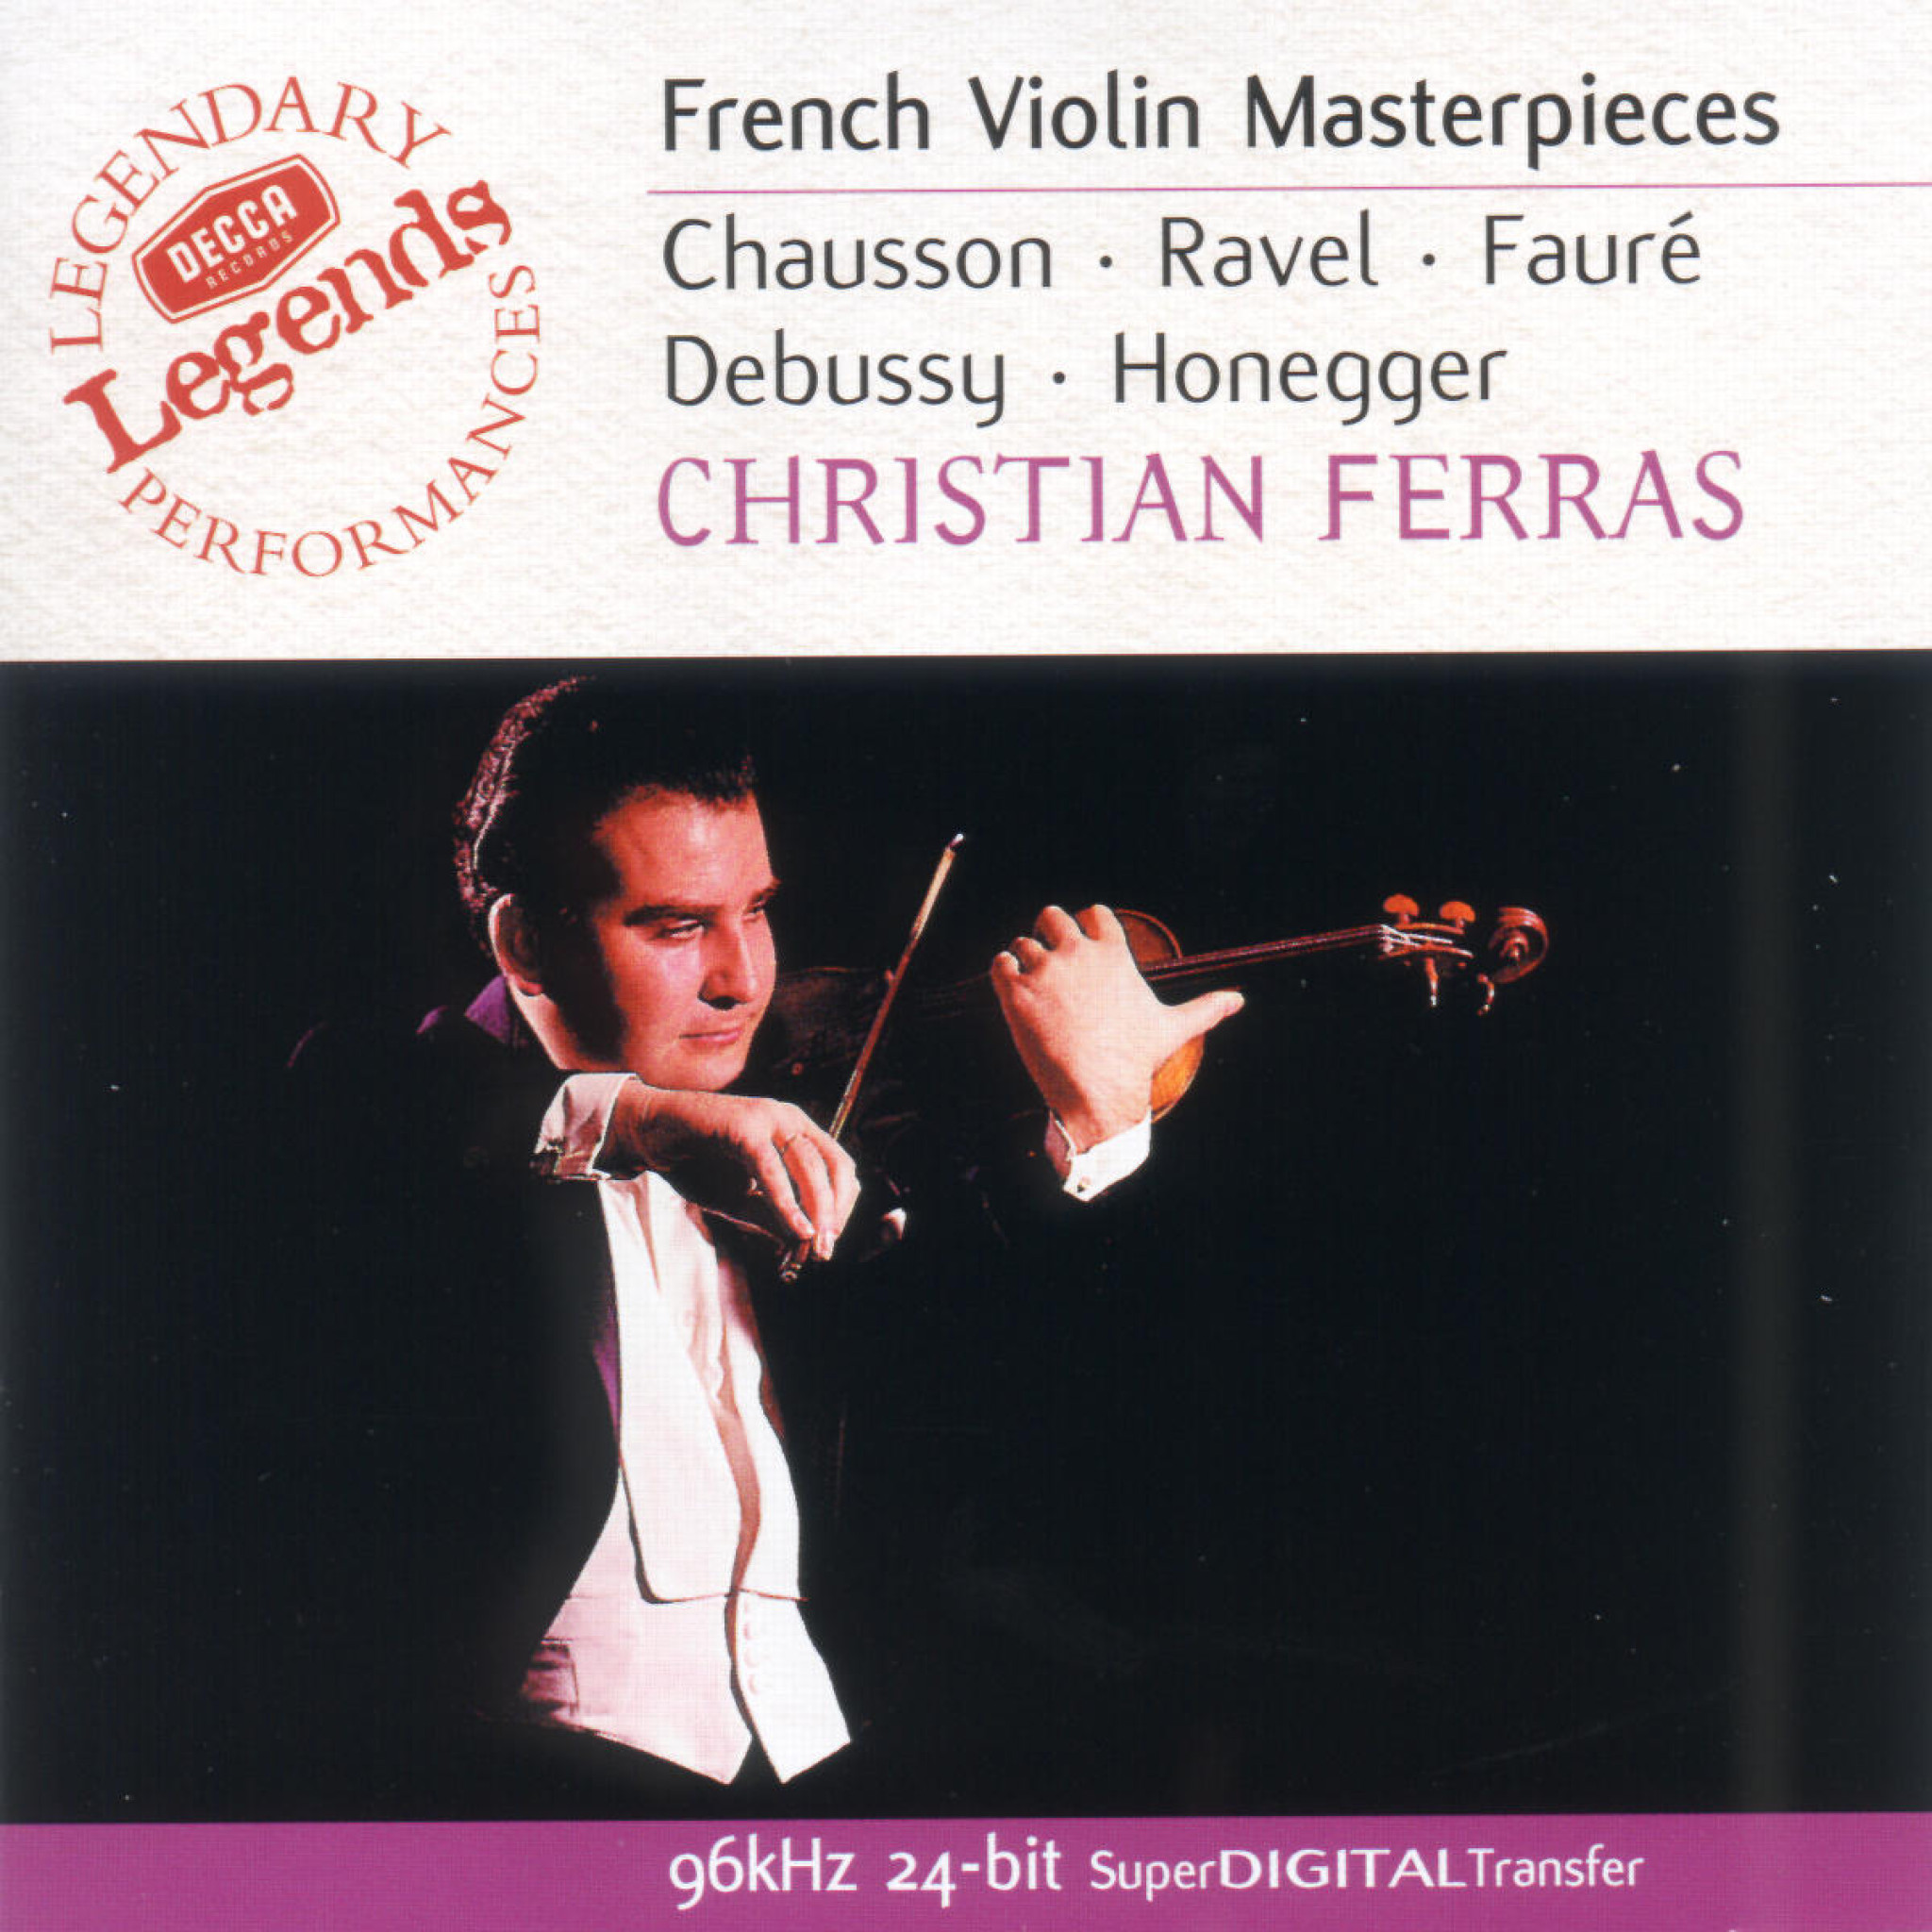 FRENCH VIOLIN MASTERPIECES 